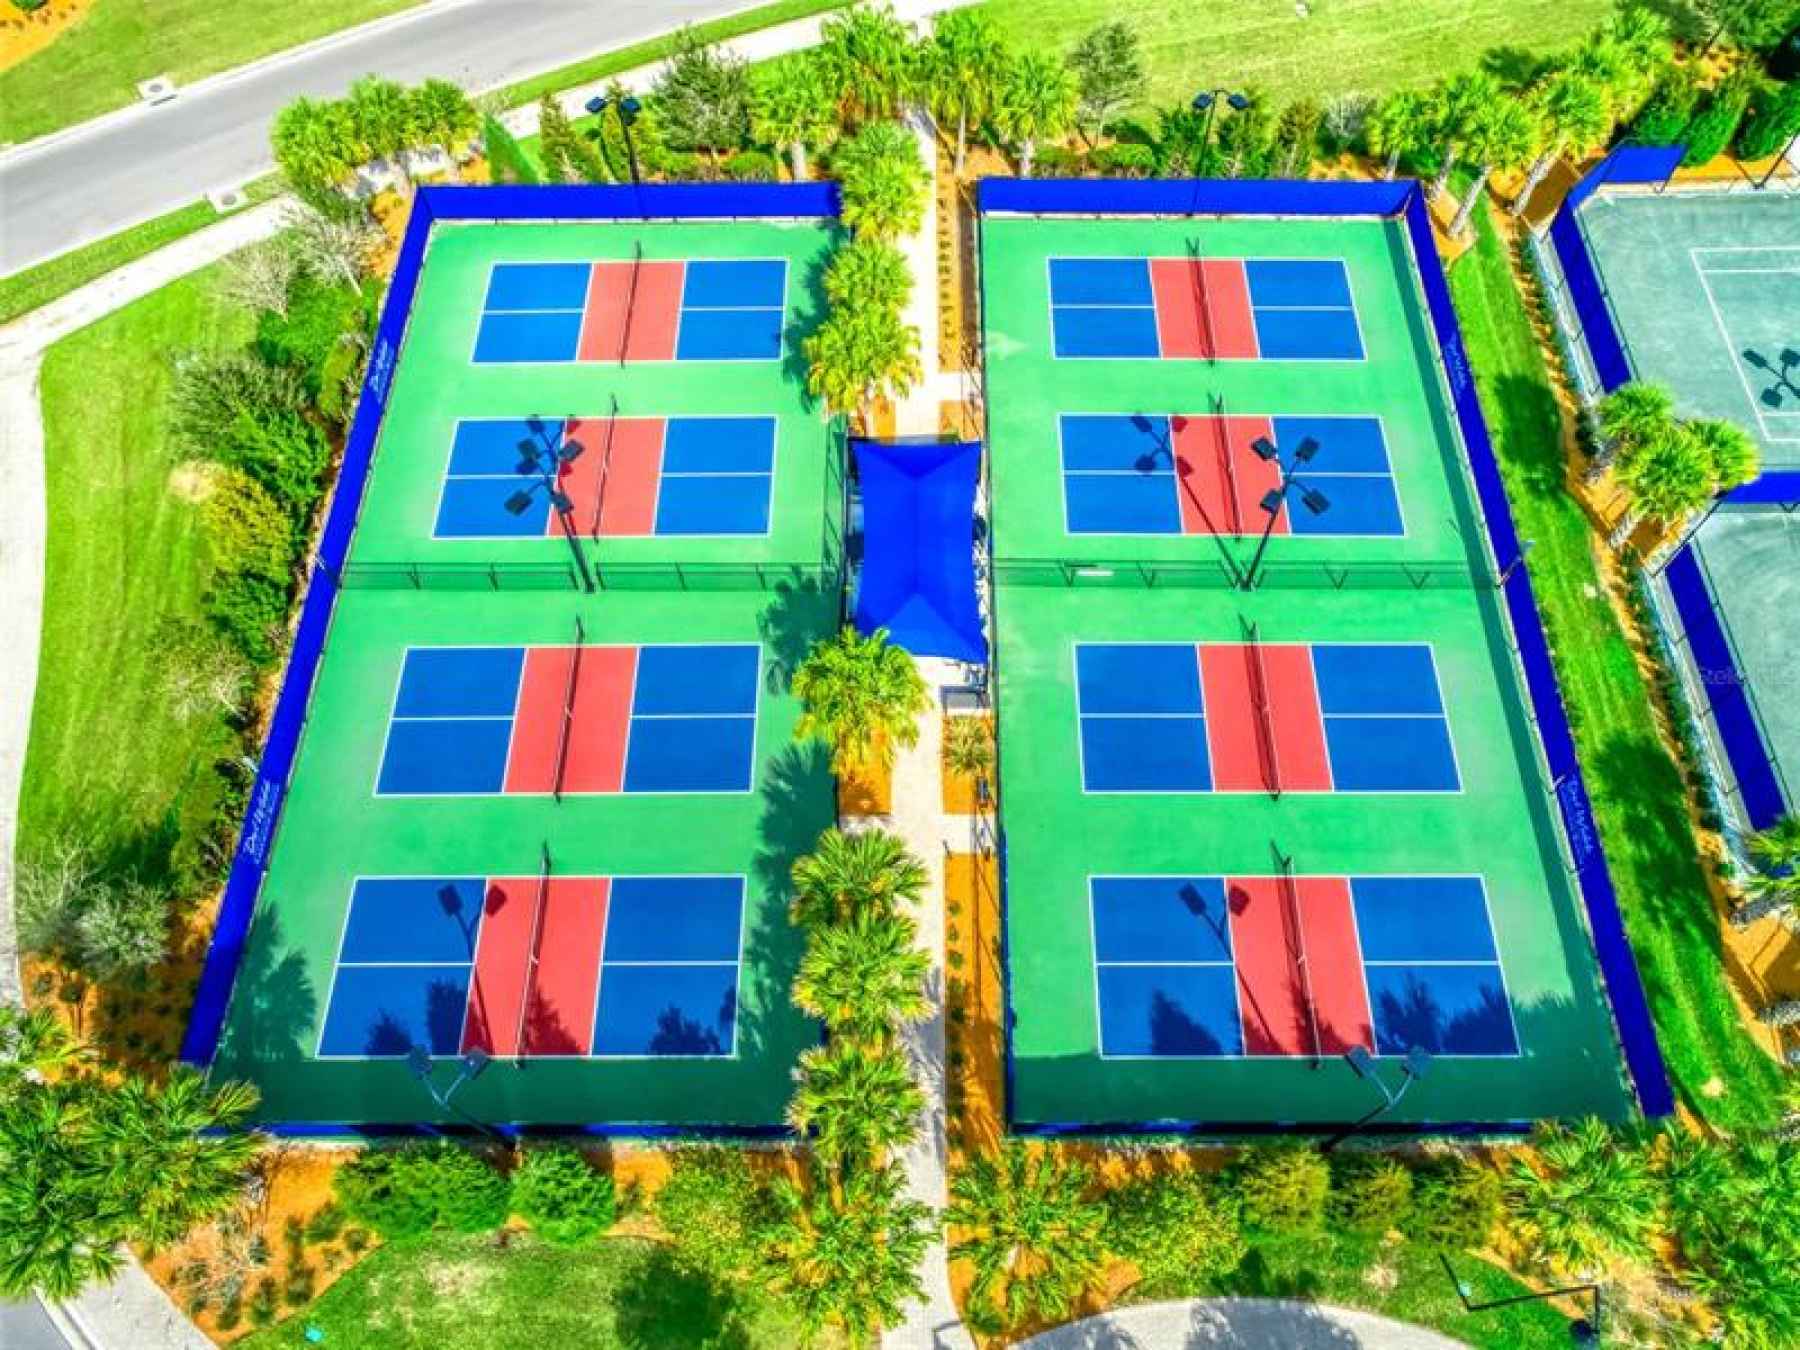 Play on 8 Pickle Ball Courts